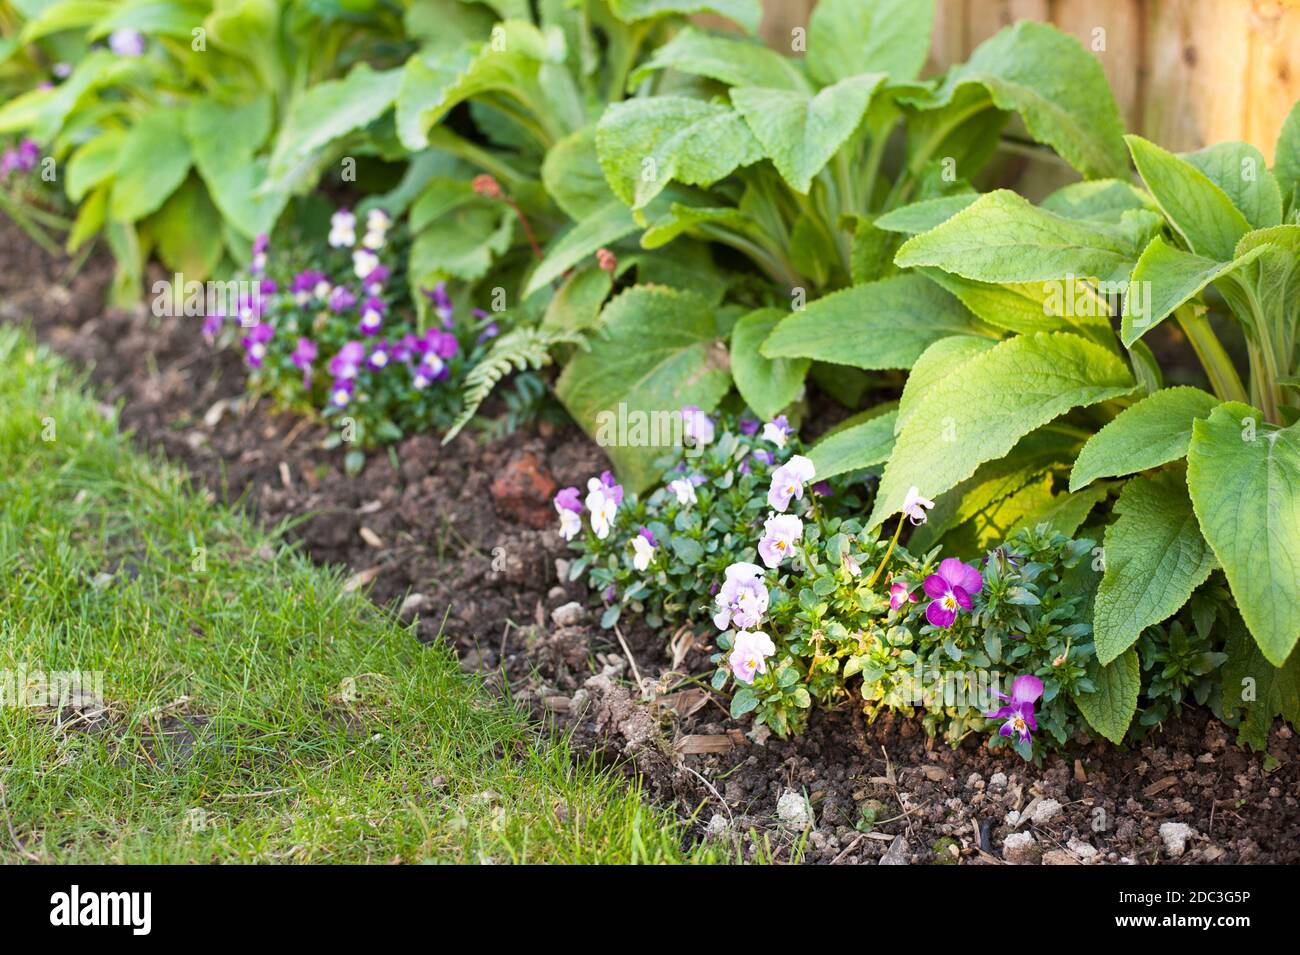 Lilac and purple violas in spring growing in a bed in front of foxgloves Stock Photo